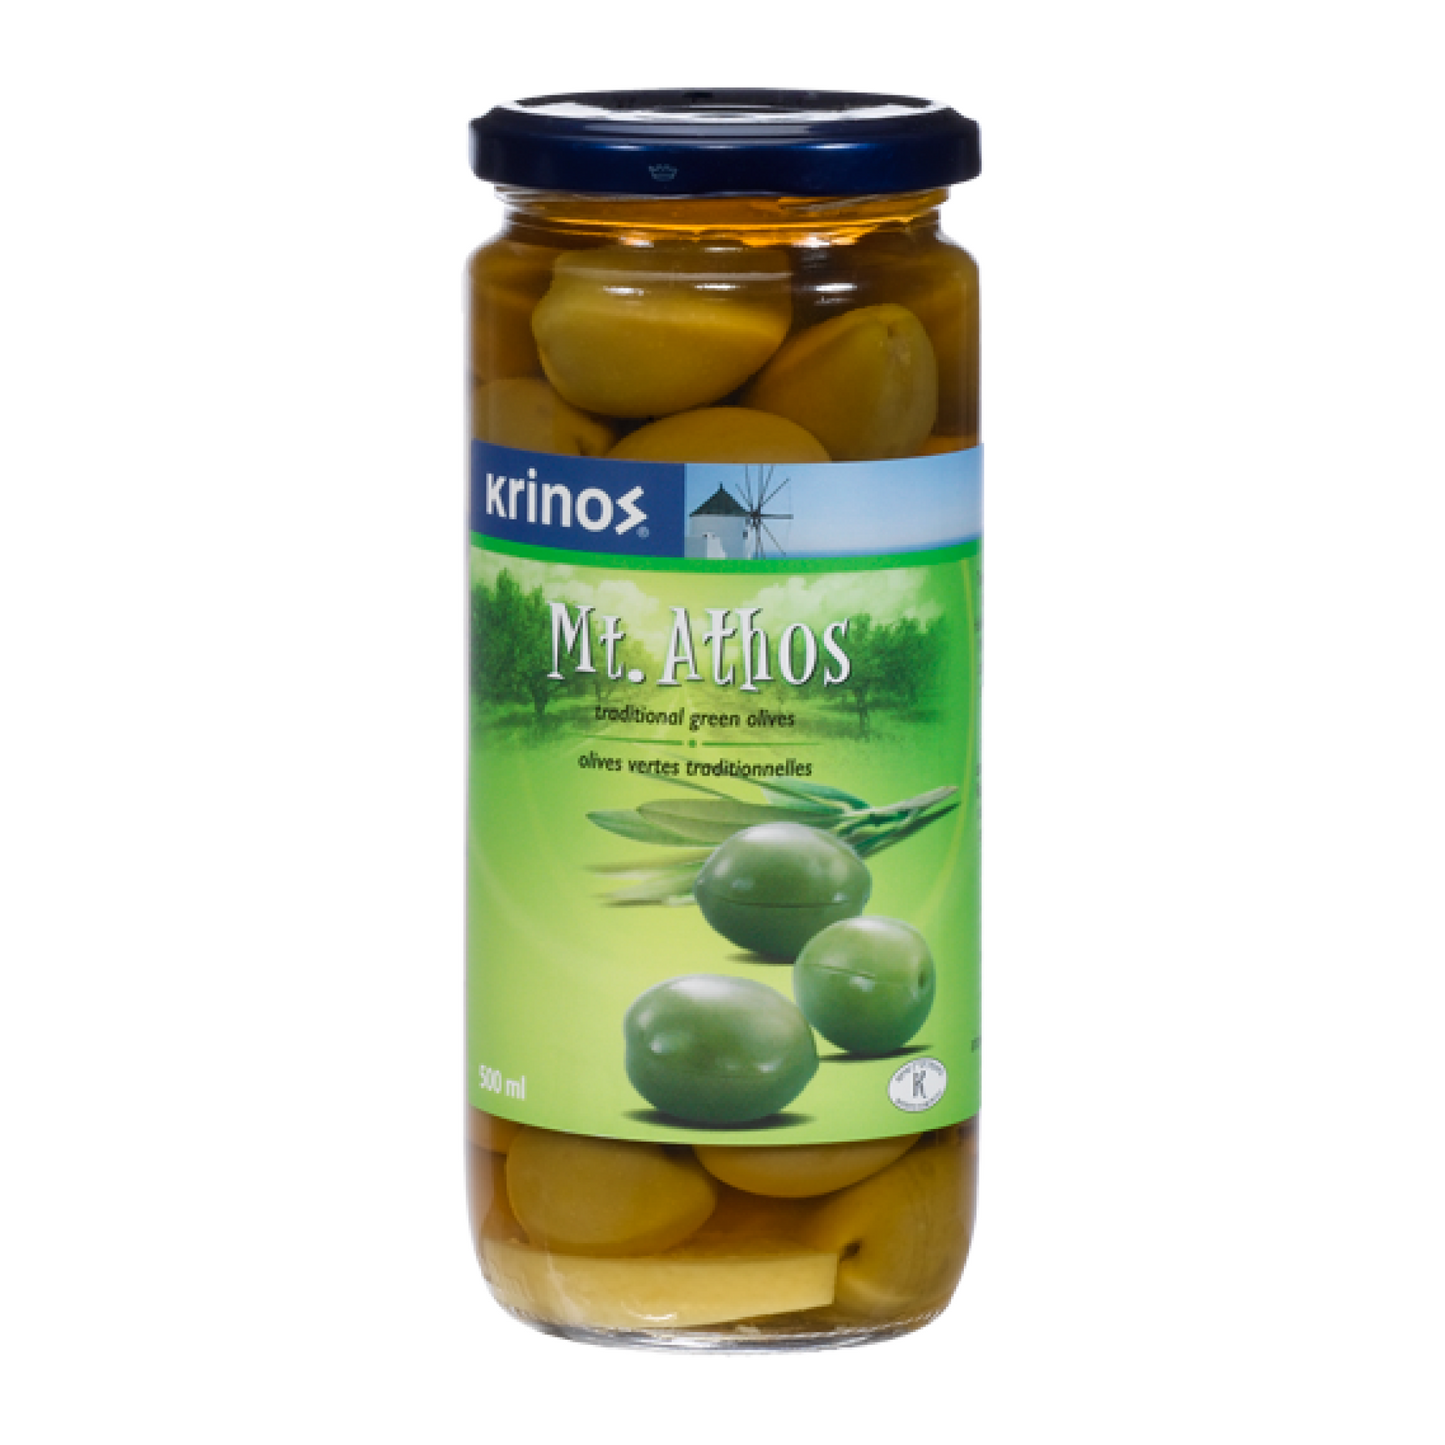 Krinos Mt. Athos Traditional Green Olives In Brine 500ml